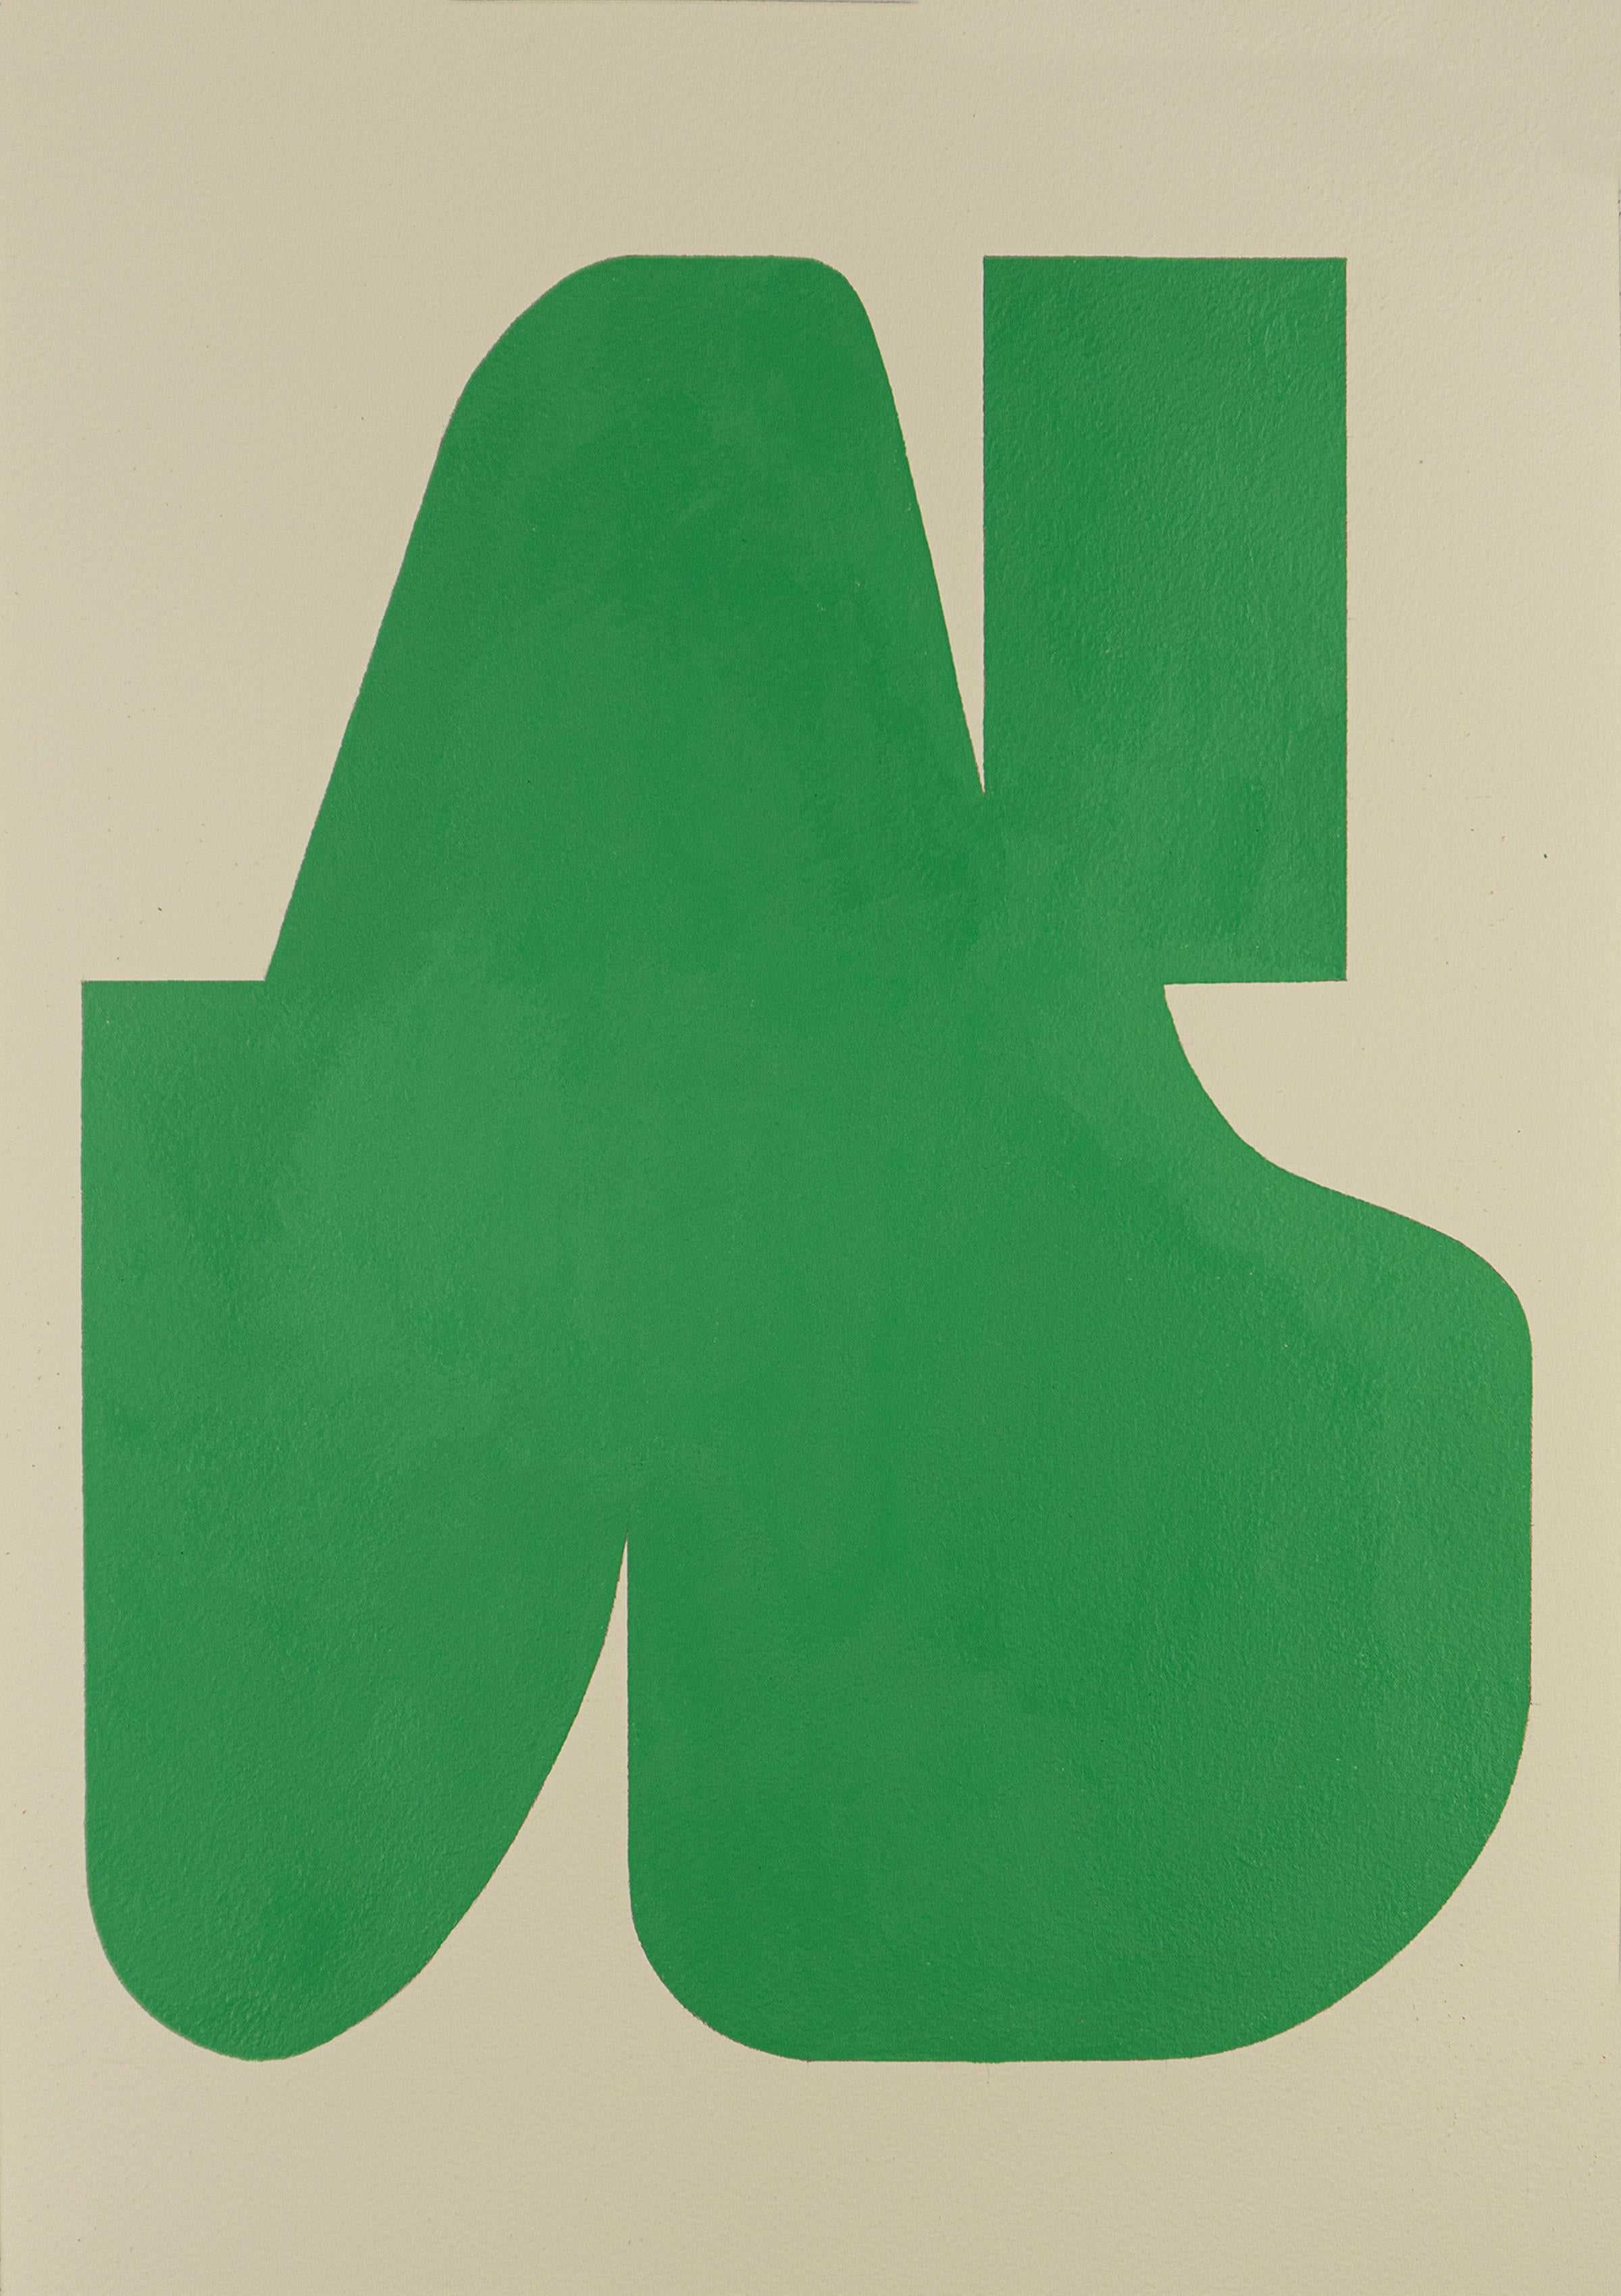 Ryan Park Abstract Drawing - Shape 40 (2019) - Abstract shape, minimalist gestural, bright green, white paper